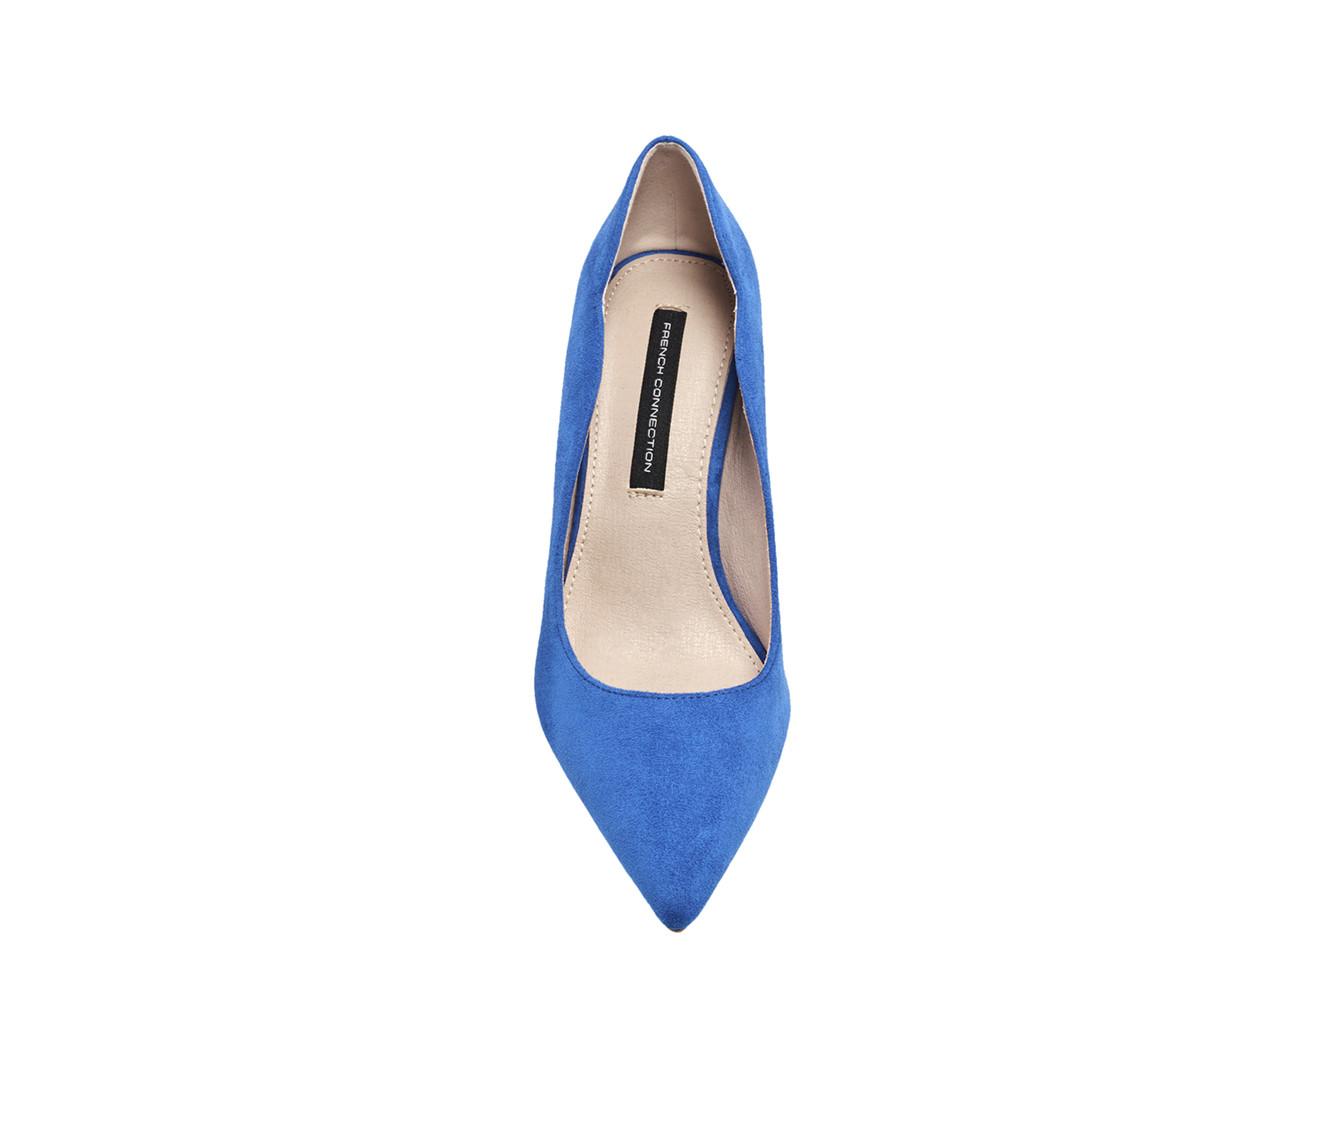 Women's French Connection Scallop Pumps